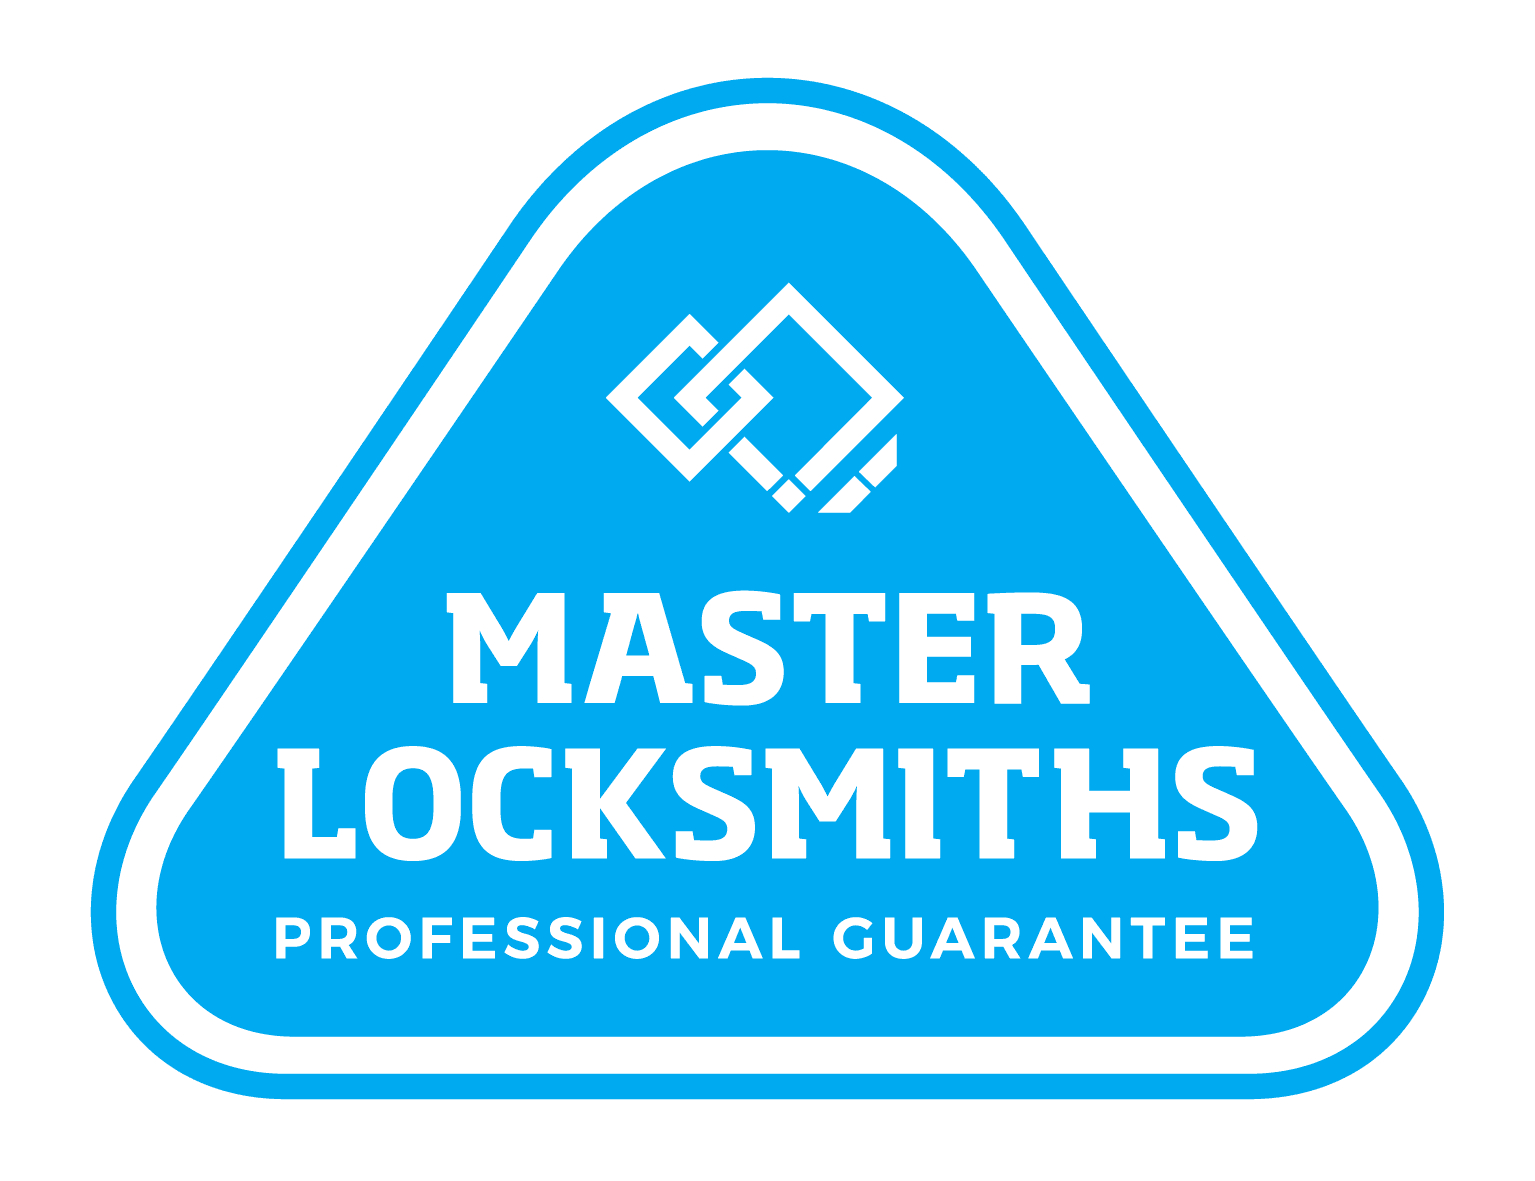 The master locksmiths logo used for websites of companies that have this qualification.